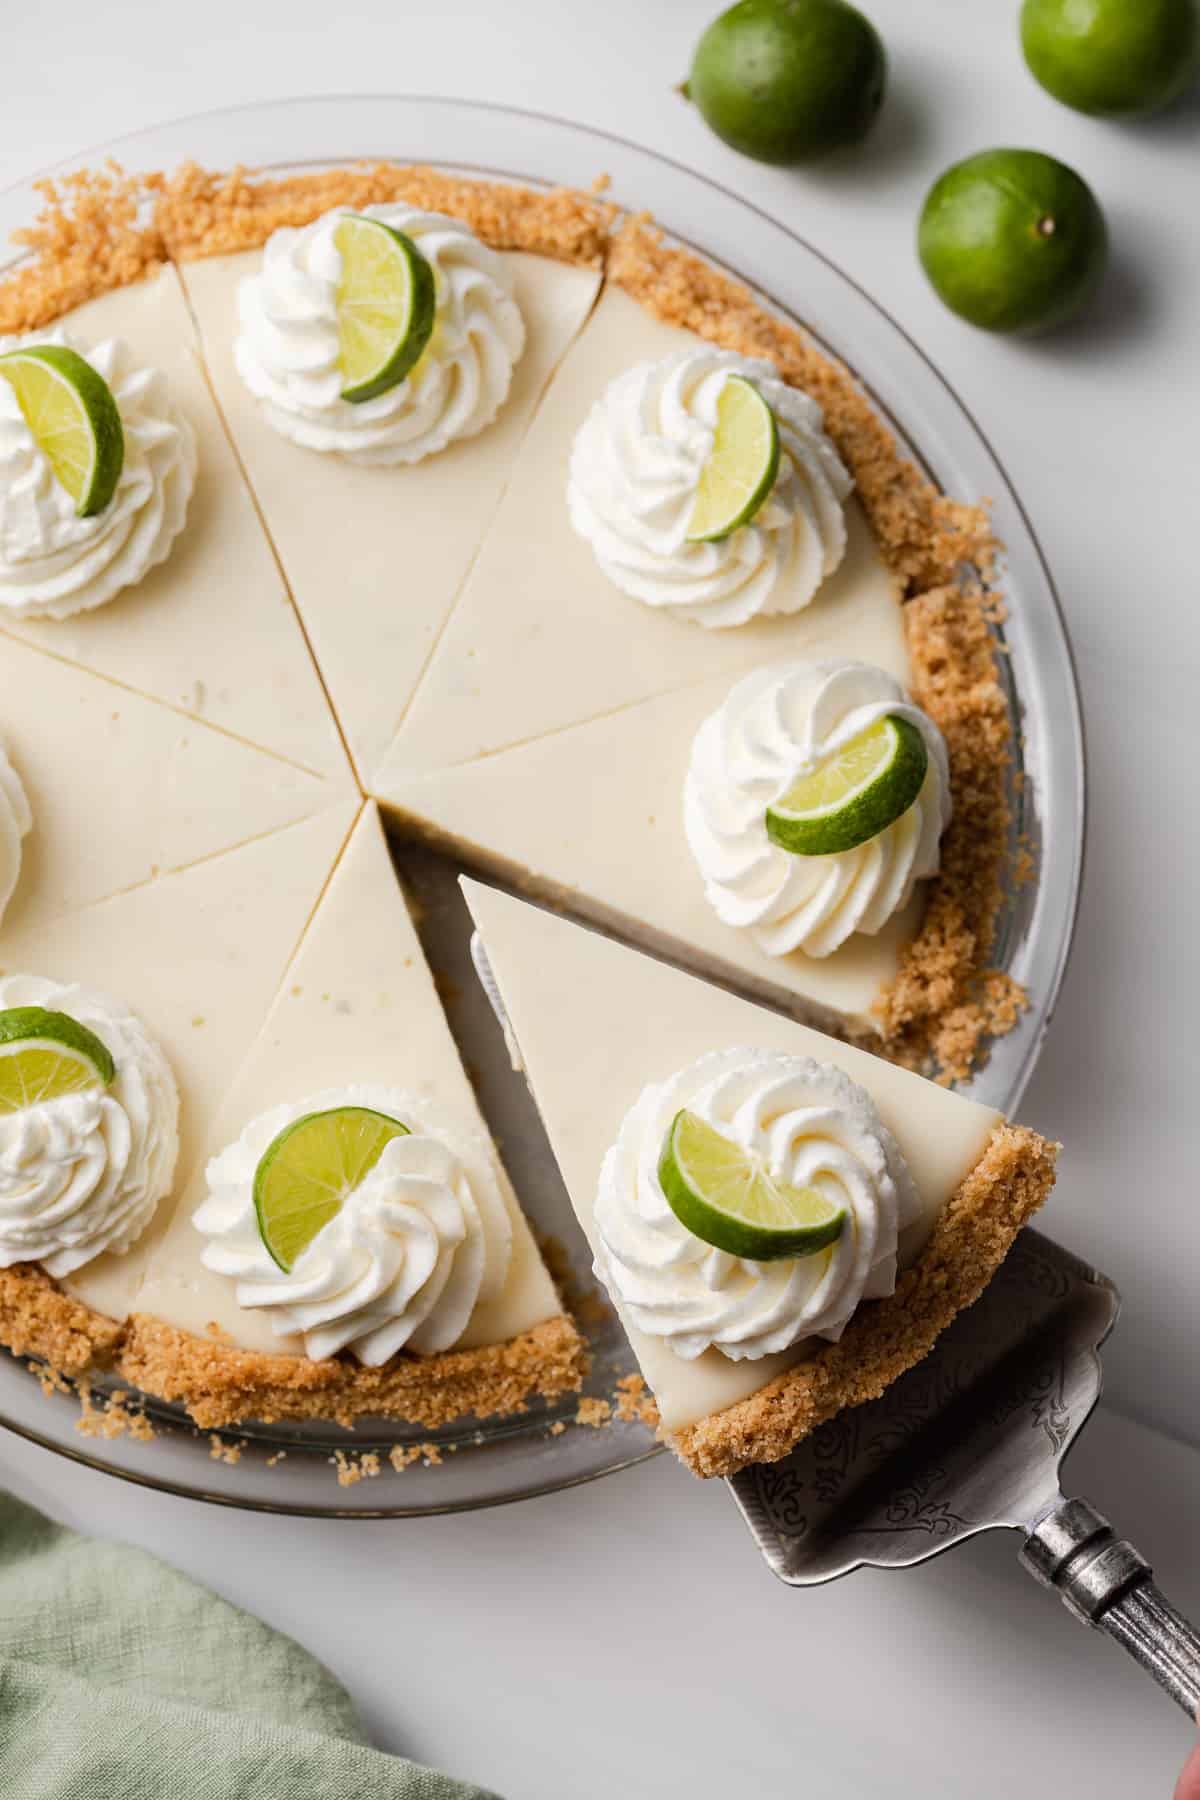 slice of homemade key lime pie being pulled out of whole pie